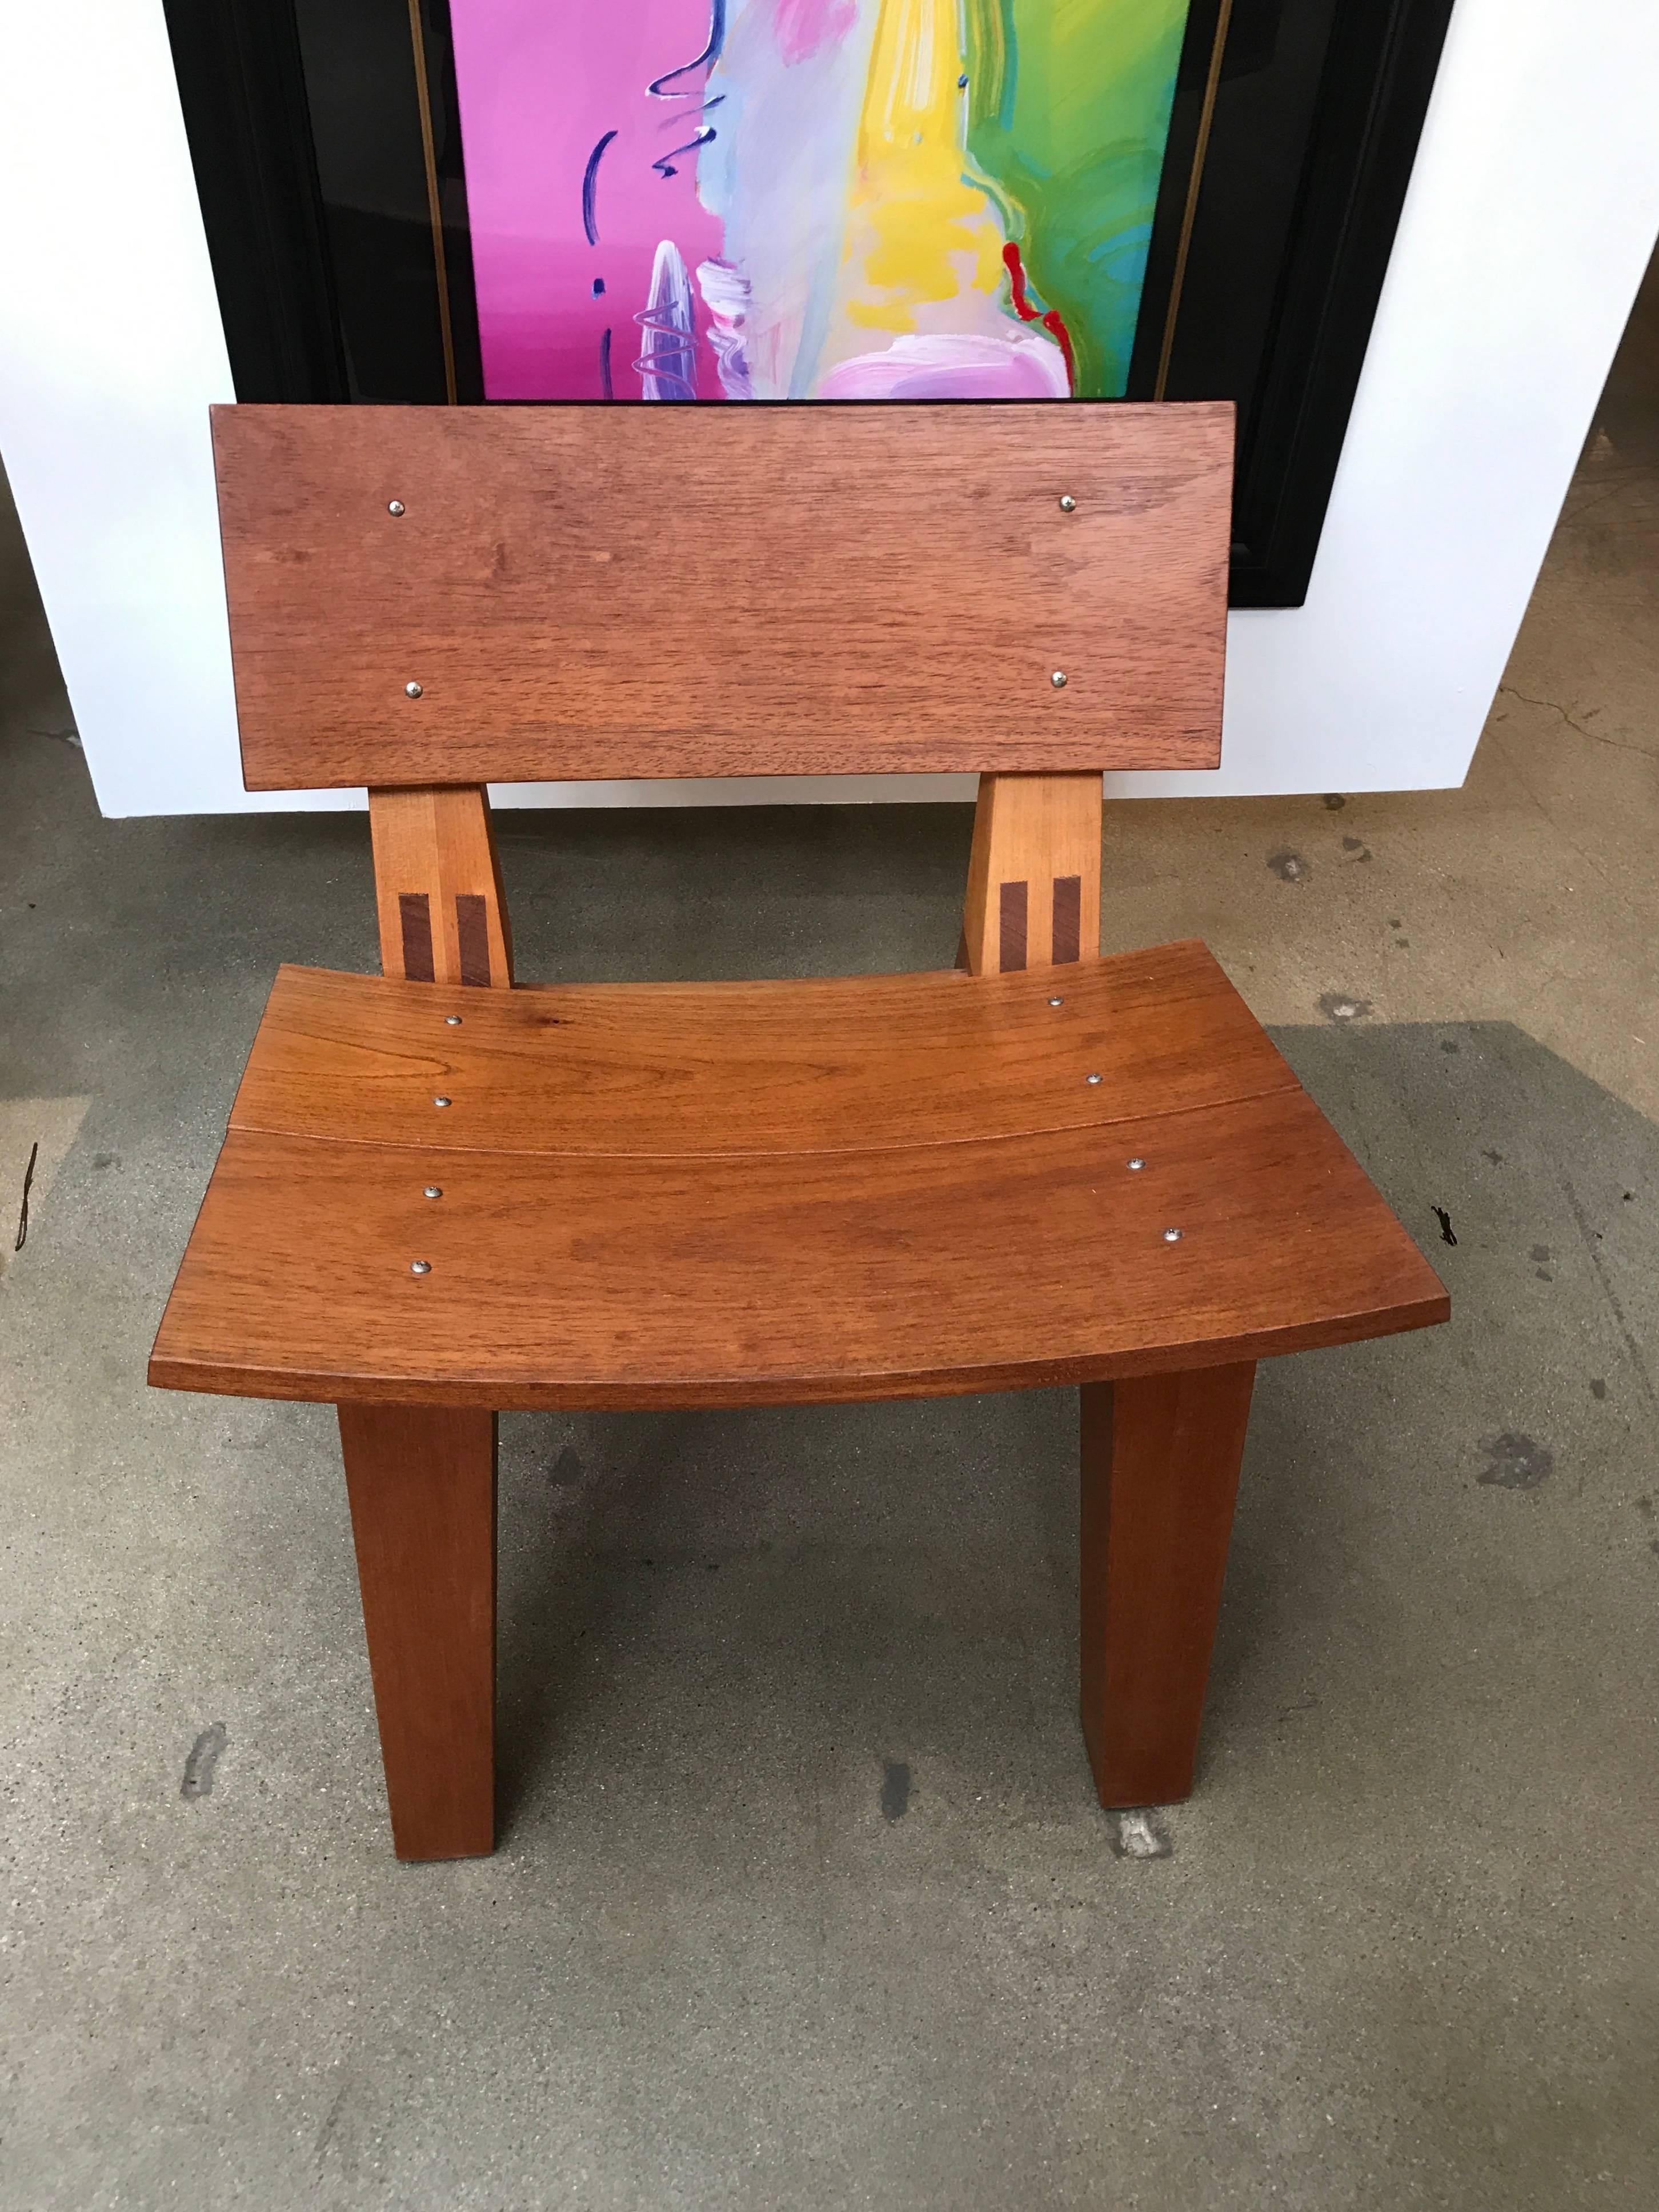 A unique prototype chair by the re-known architect and furniture designer Rob Edley Welborn. This chair eventually went into production in wood, but is no longer available. This one is hand built and it is surprisingly comfortable. The wood is